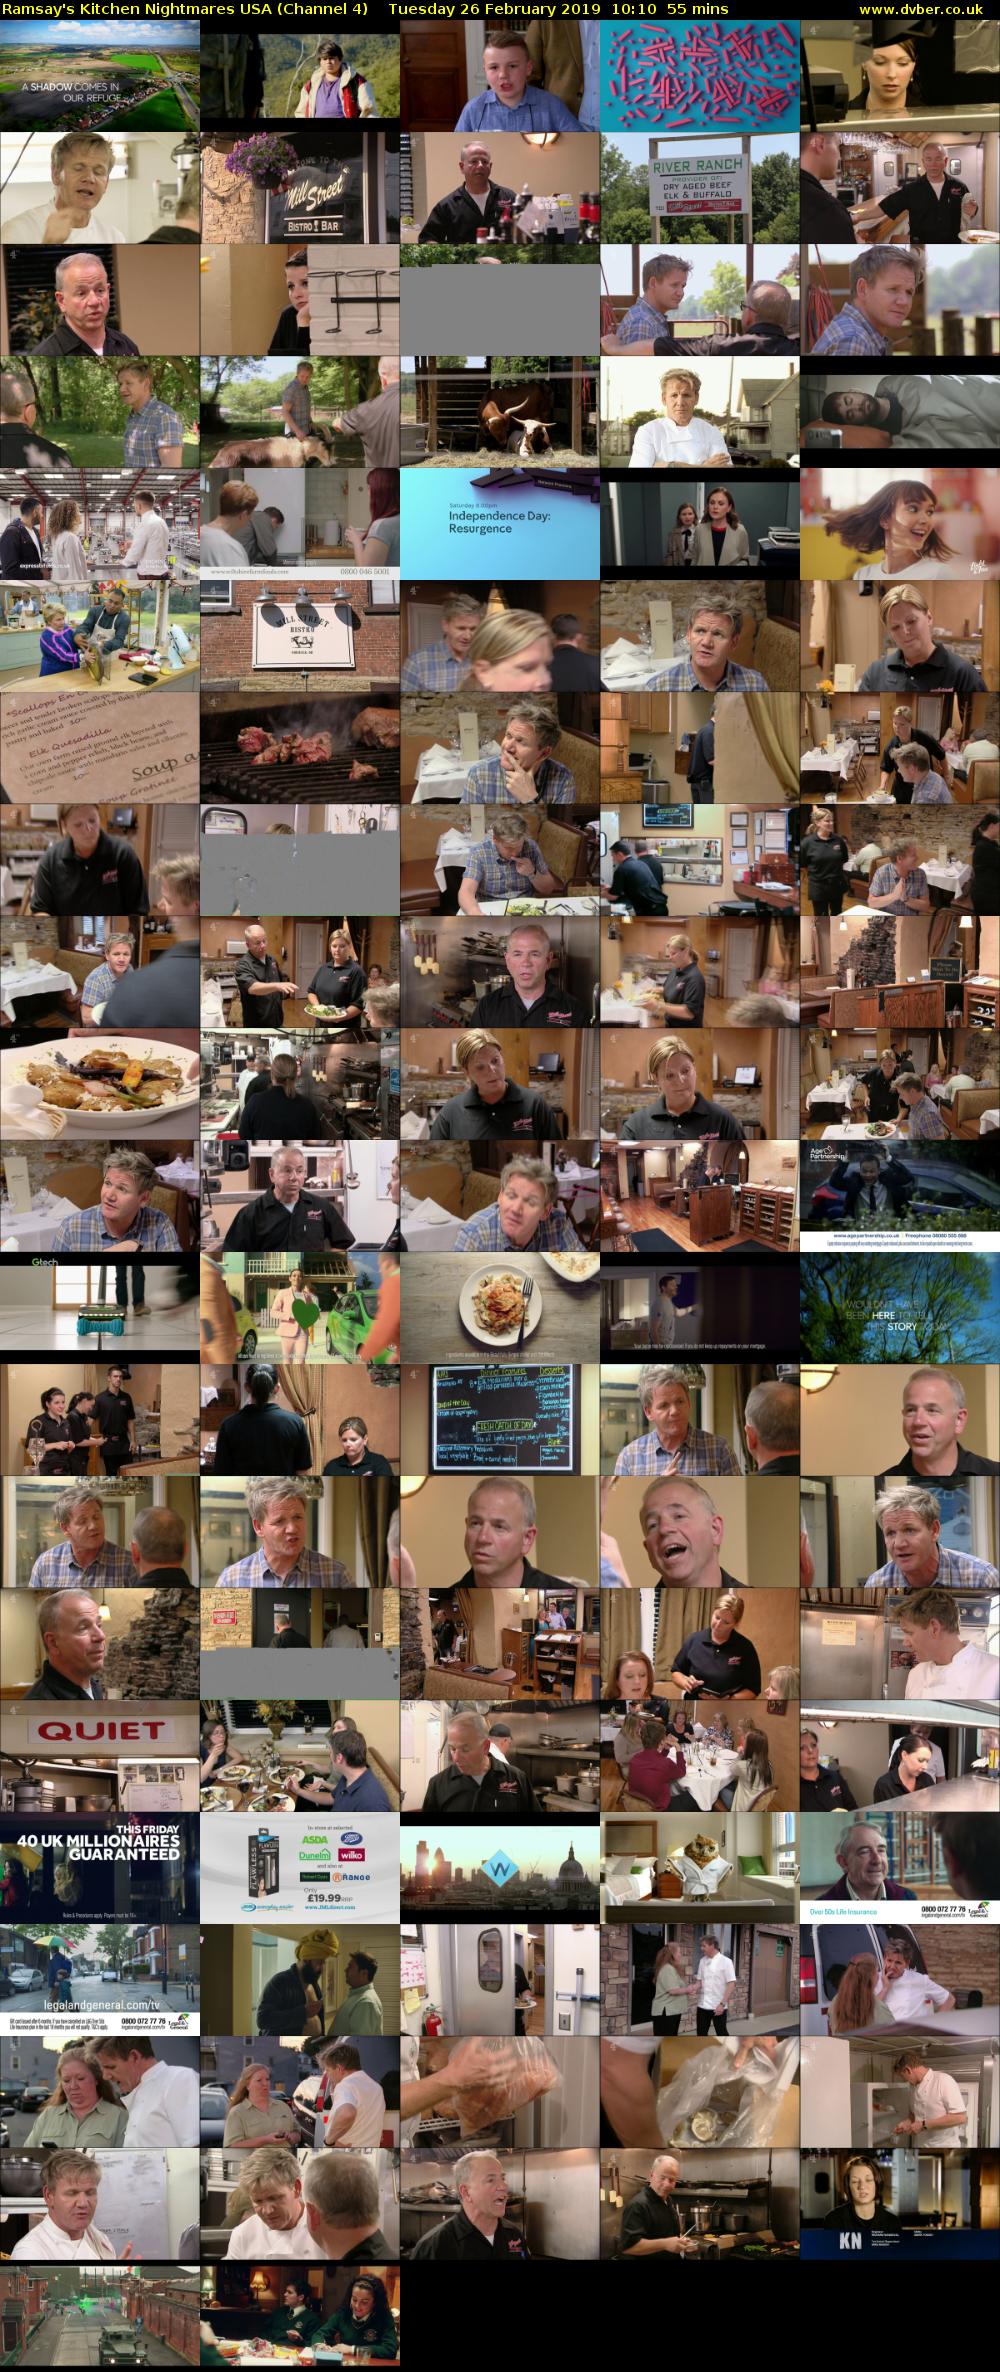 Ramsay's Kitchen Nightmares USA (Channel 4) Tuesday 26 February 2019 10:10 - 11:05